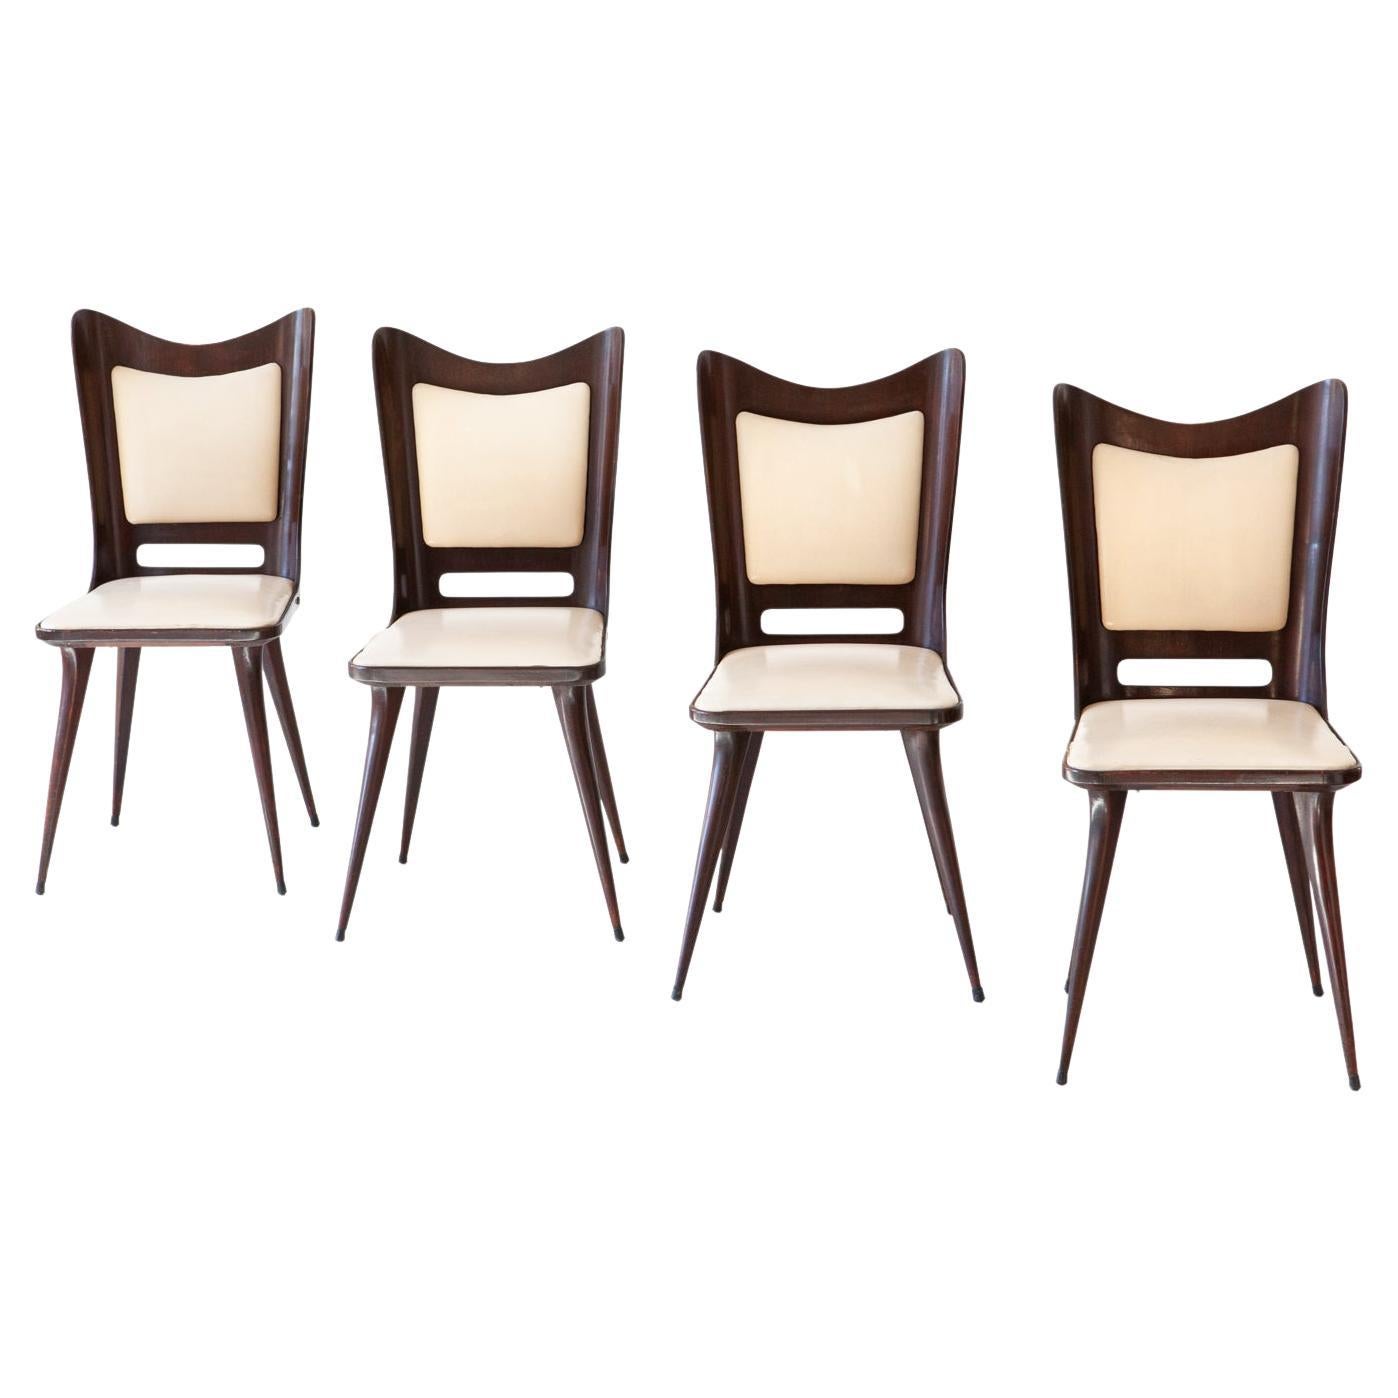 Set of Four Italian Beige Skai and Mahogany Dining Chairs, 1950s